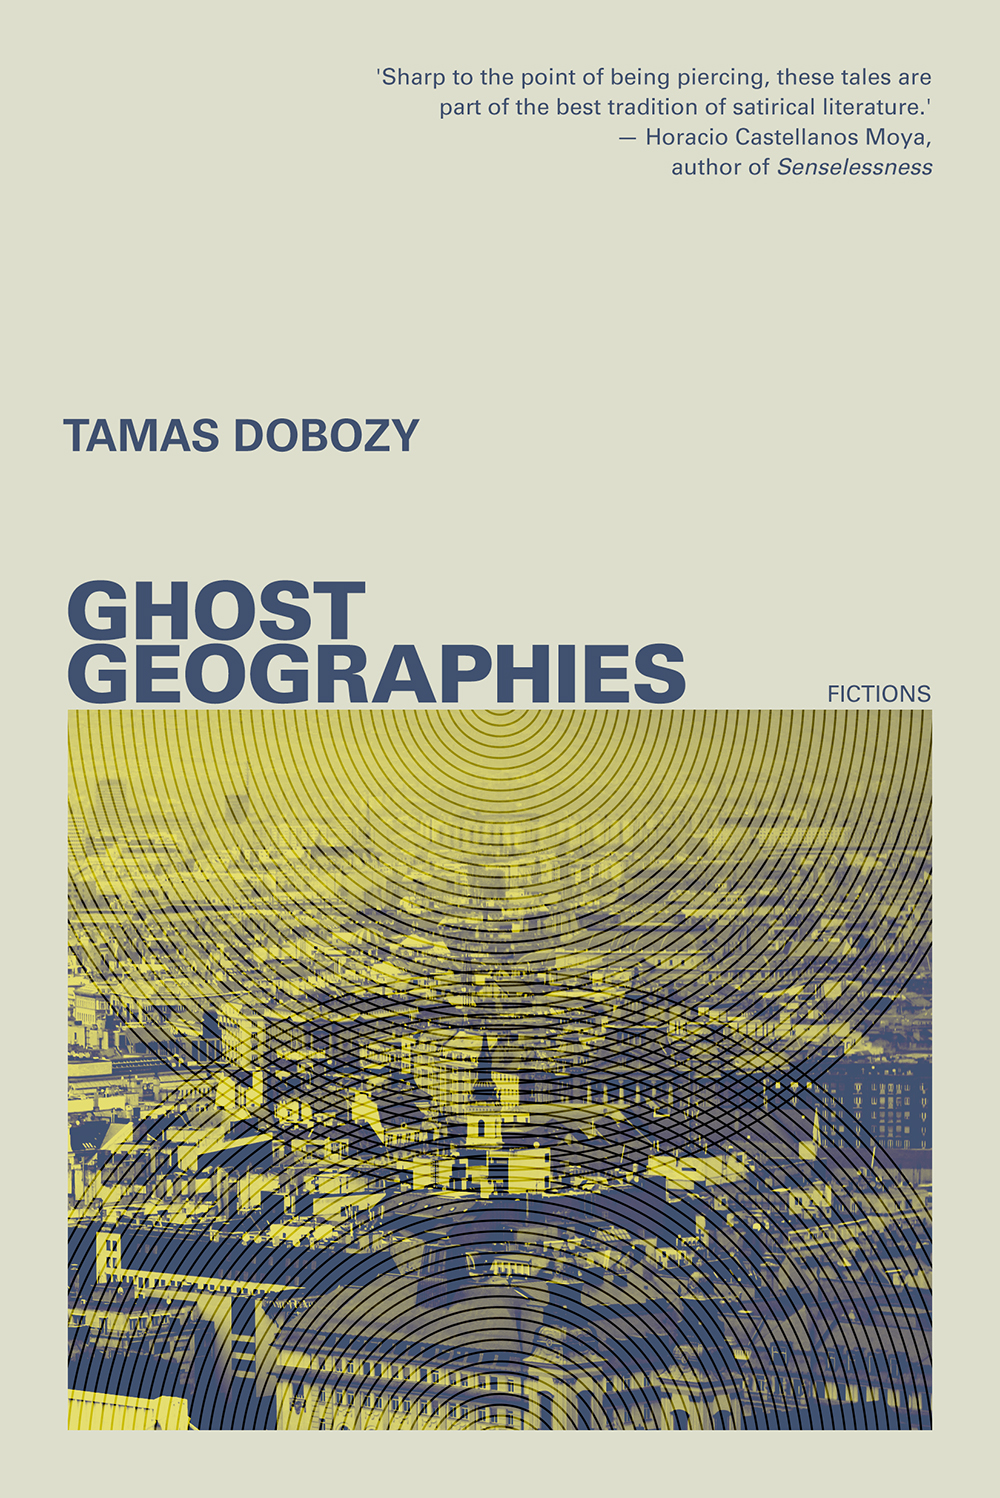 Ghost Geographies by Tamas Dobozy